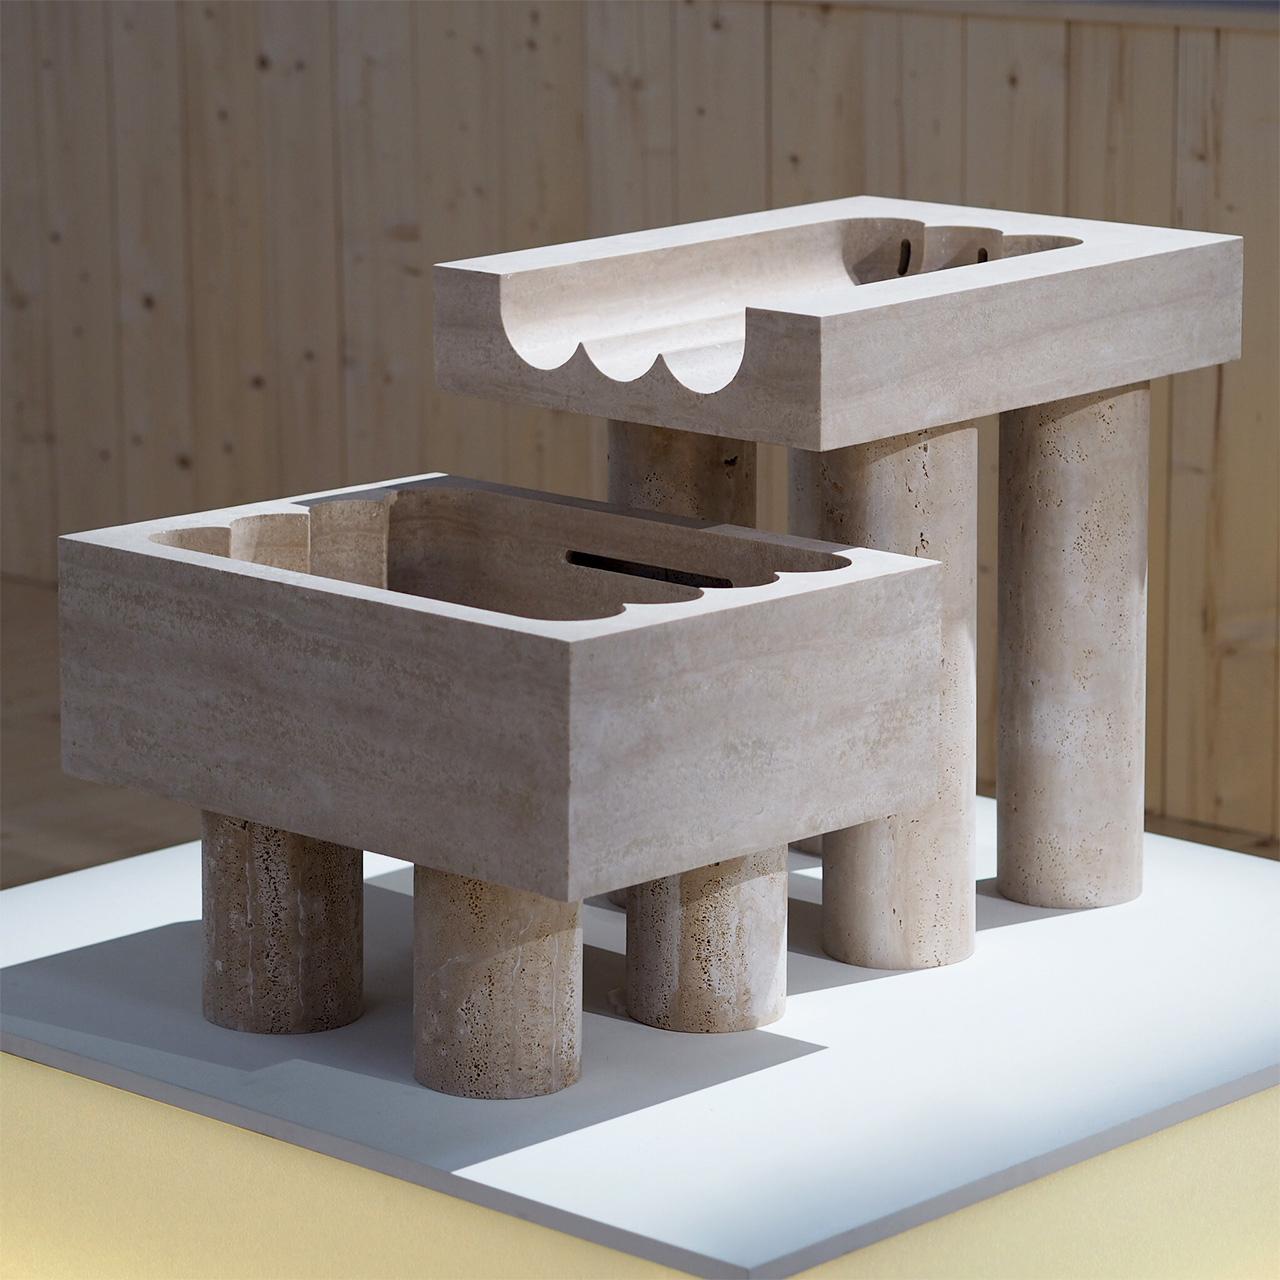 Roman Travertine Monolithic font by Tino Seubert
Dimensions: D 100.5 x W 61 x H 62.1 cm.
Materials: Roman Travertine.

Tino Seubert
When he first made his now signature wicker and aluminium stools and benches in 2018 for a show at the Hepworth